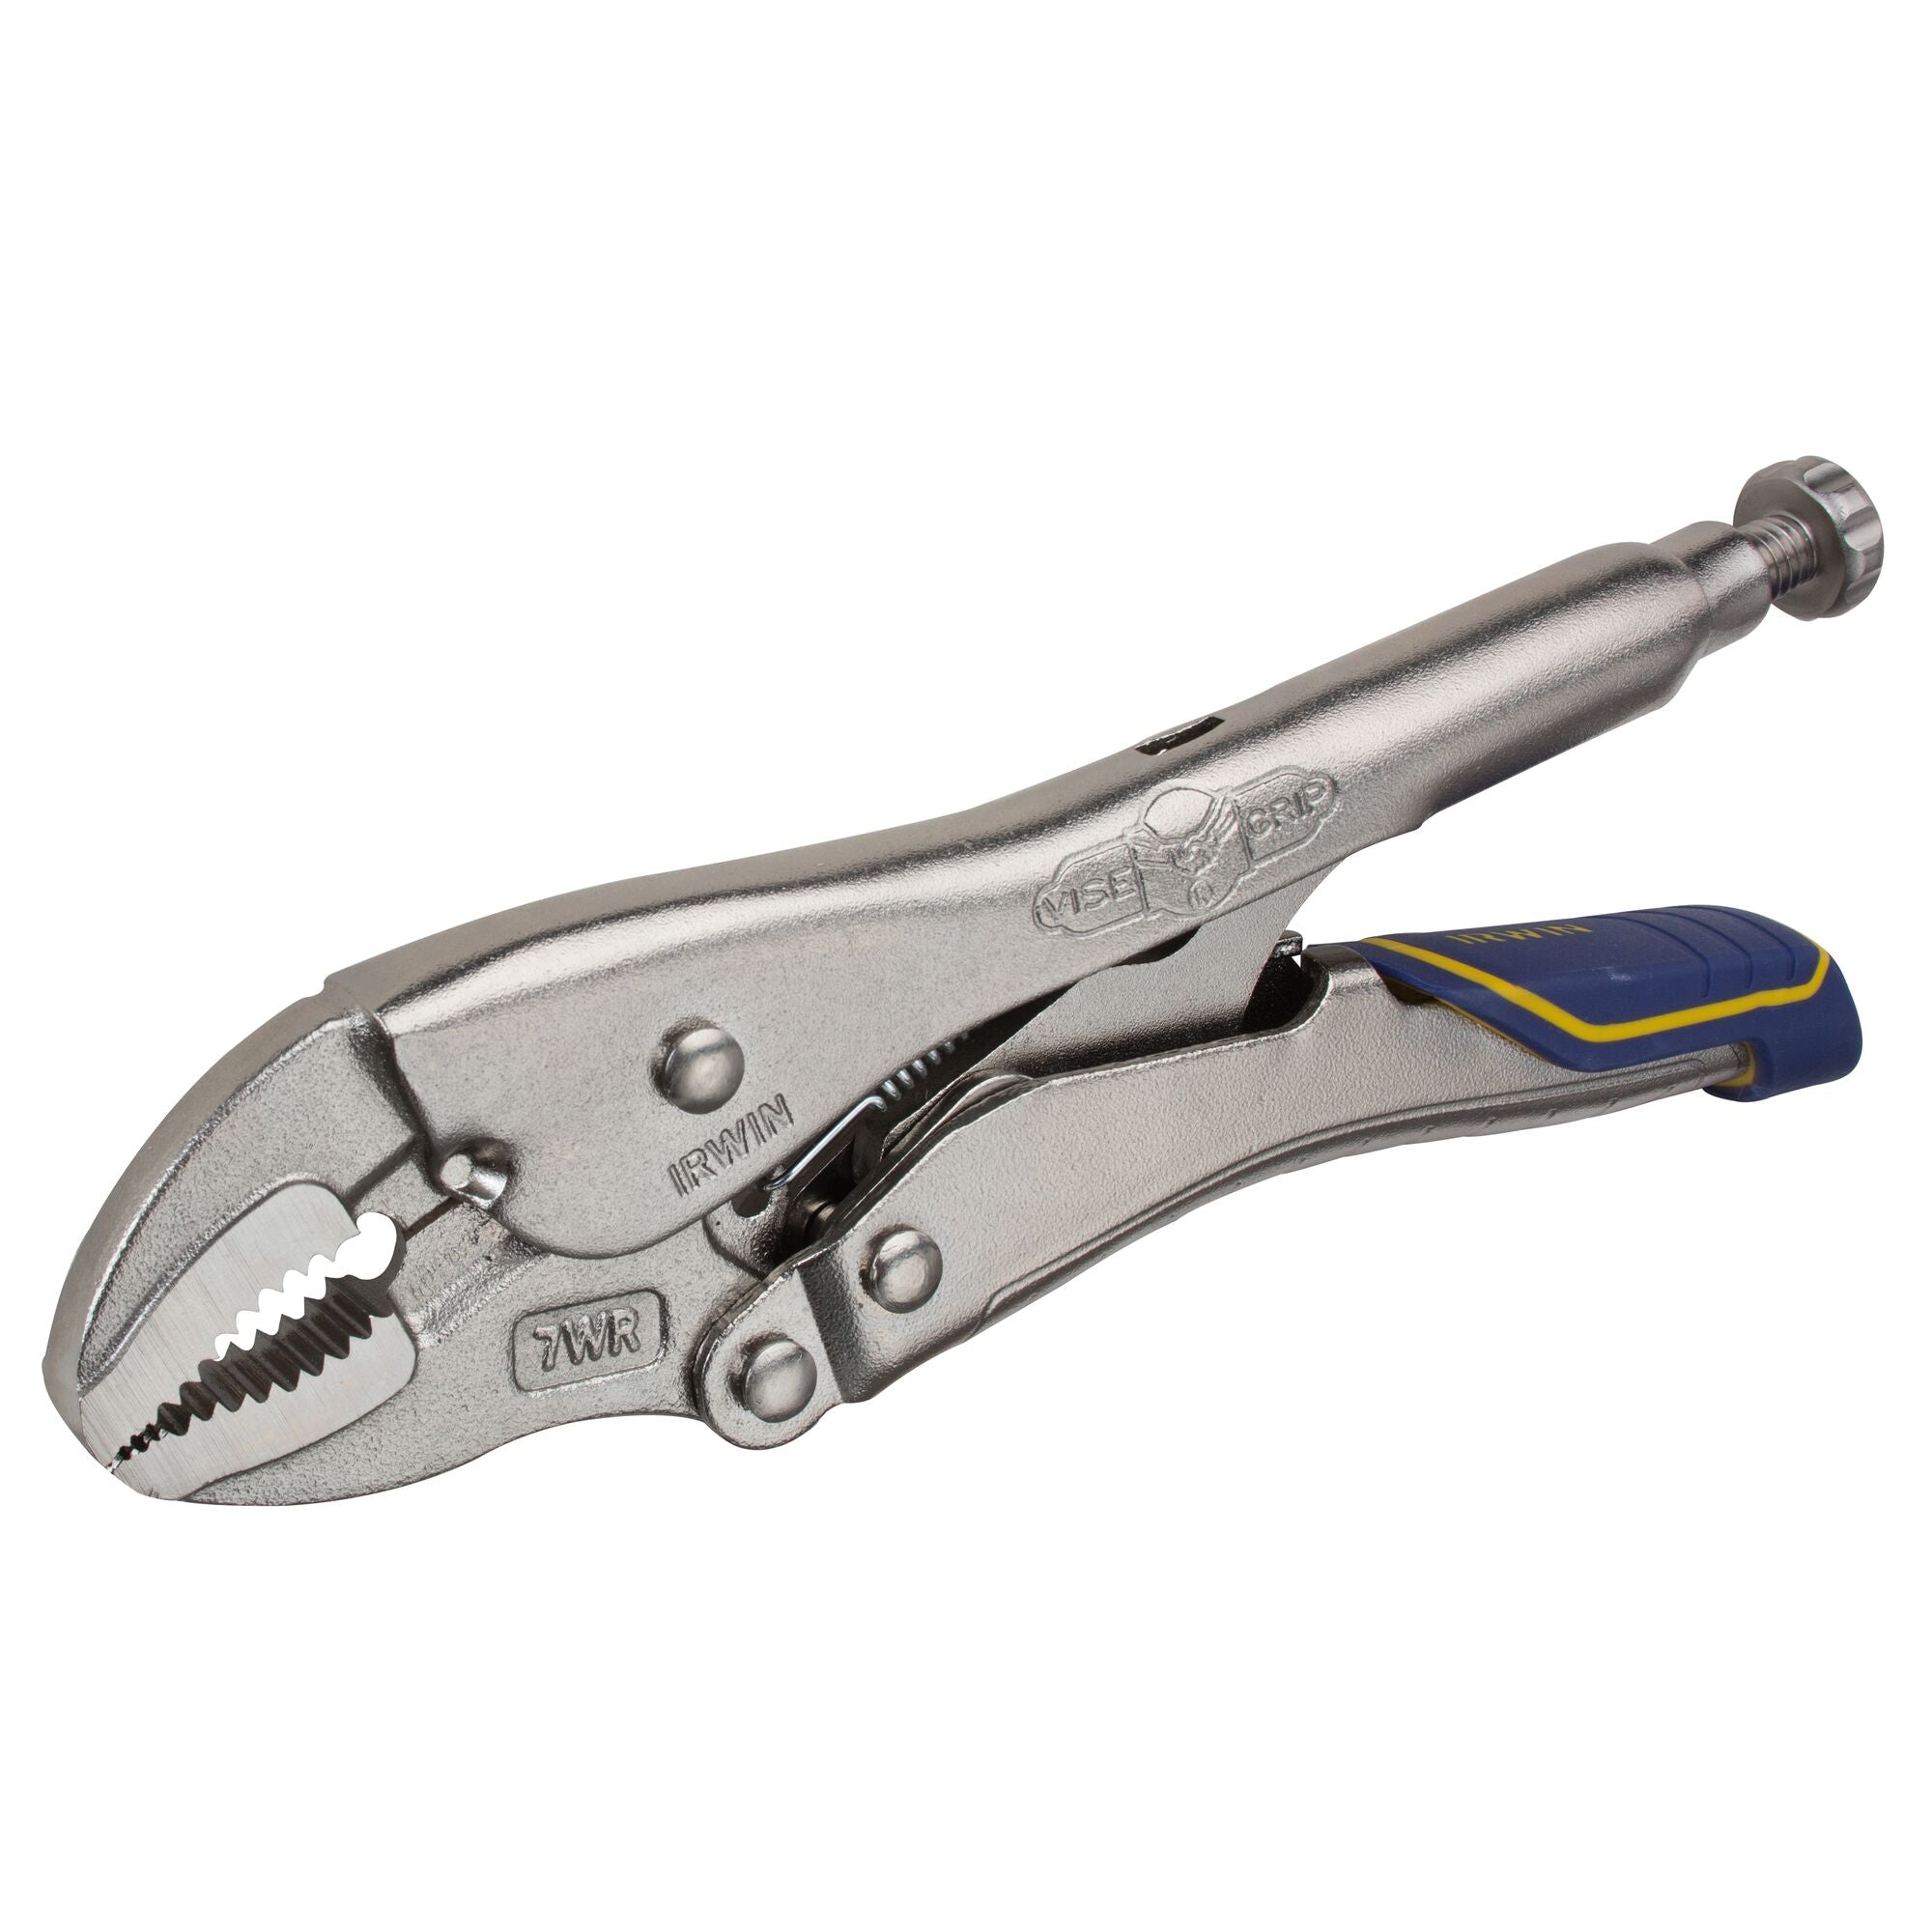 7" Curved Jaw Vise-Grip